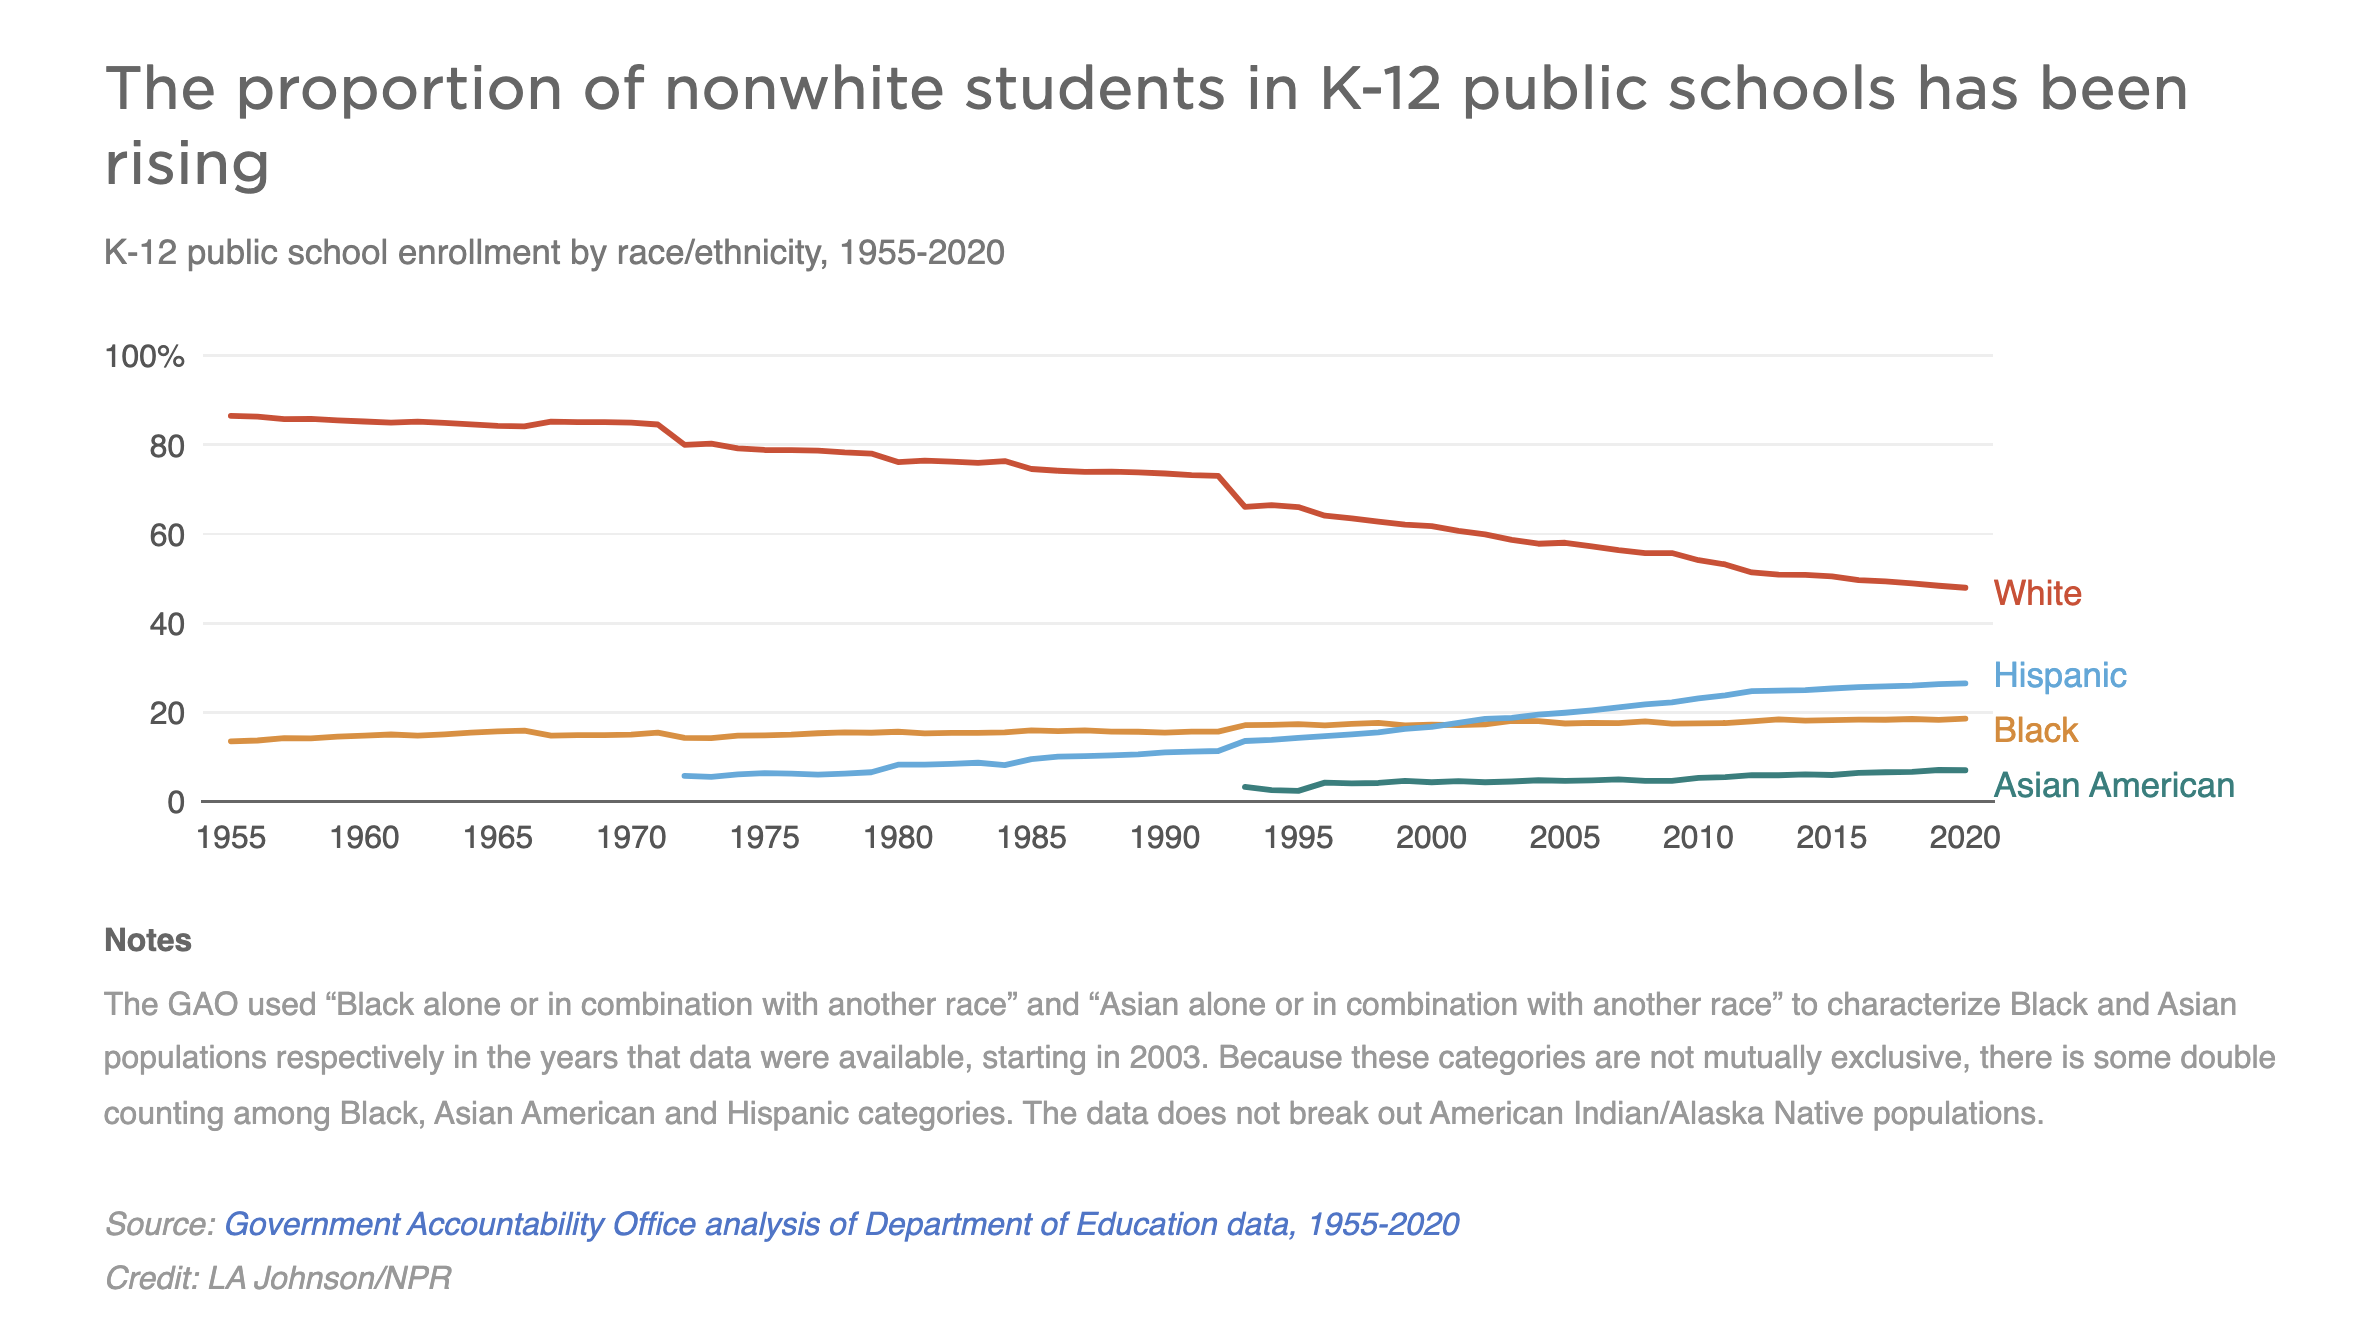 Graph showing the growth of non-white students as a proportion of student population in K-12 public schools 